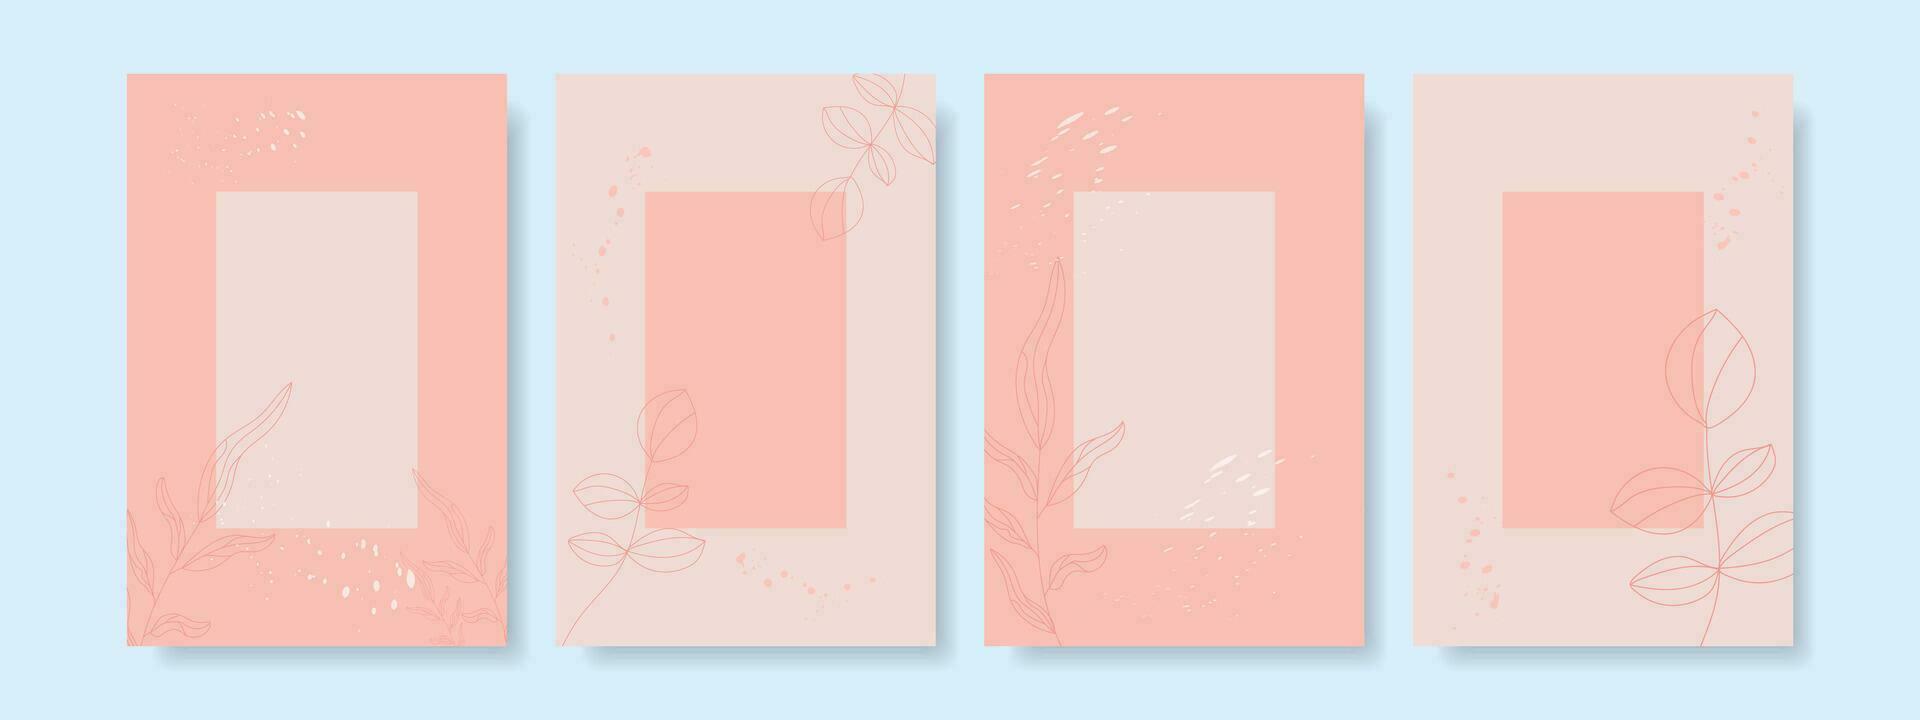 Minimal floral vector background cover. Design in Peach Fluff color for banner, cover, invitation.